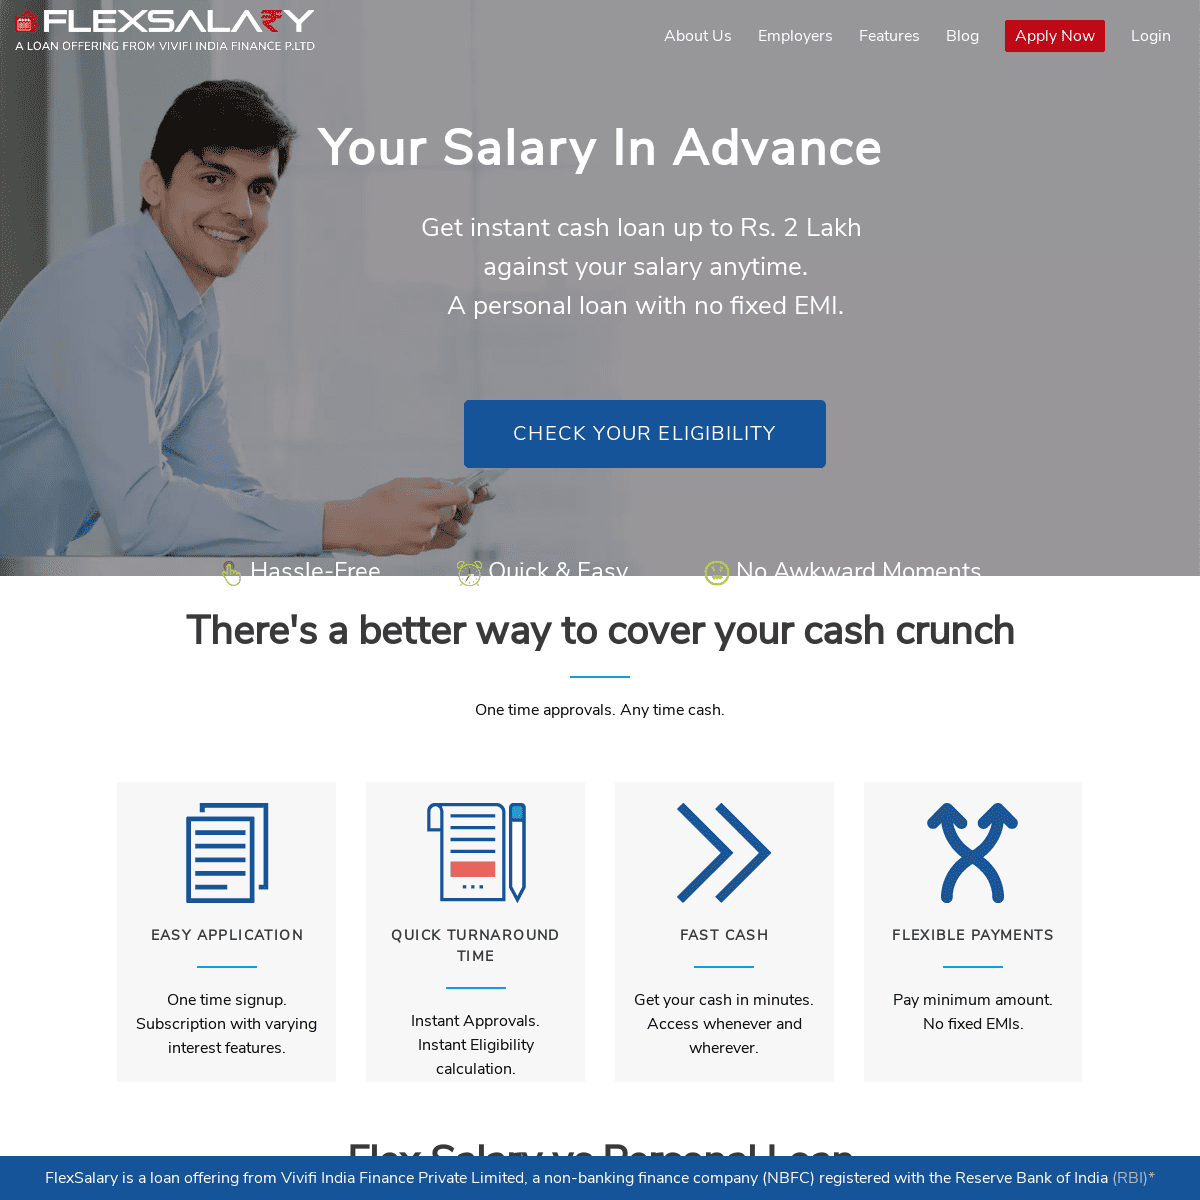 Instant Cash Loans, Personal Loans, Salary Advance, Line Of Credit Loans India- flexsalary.com